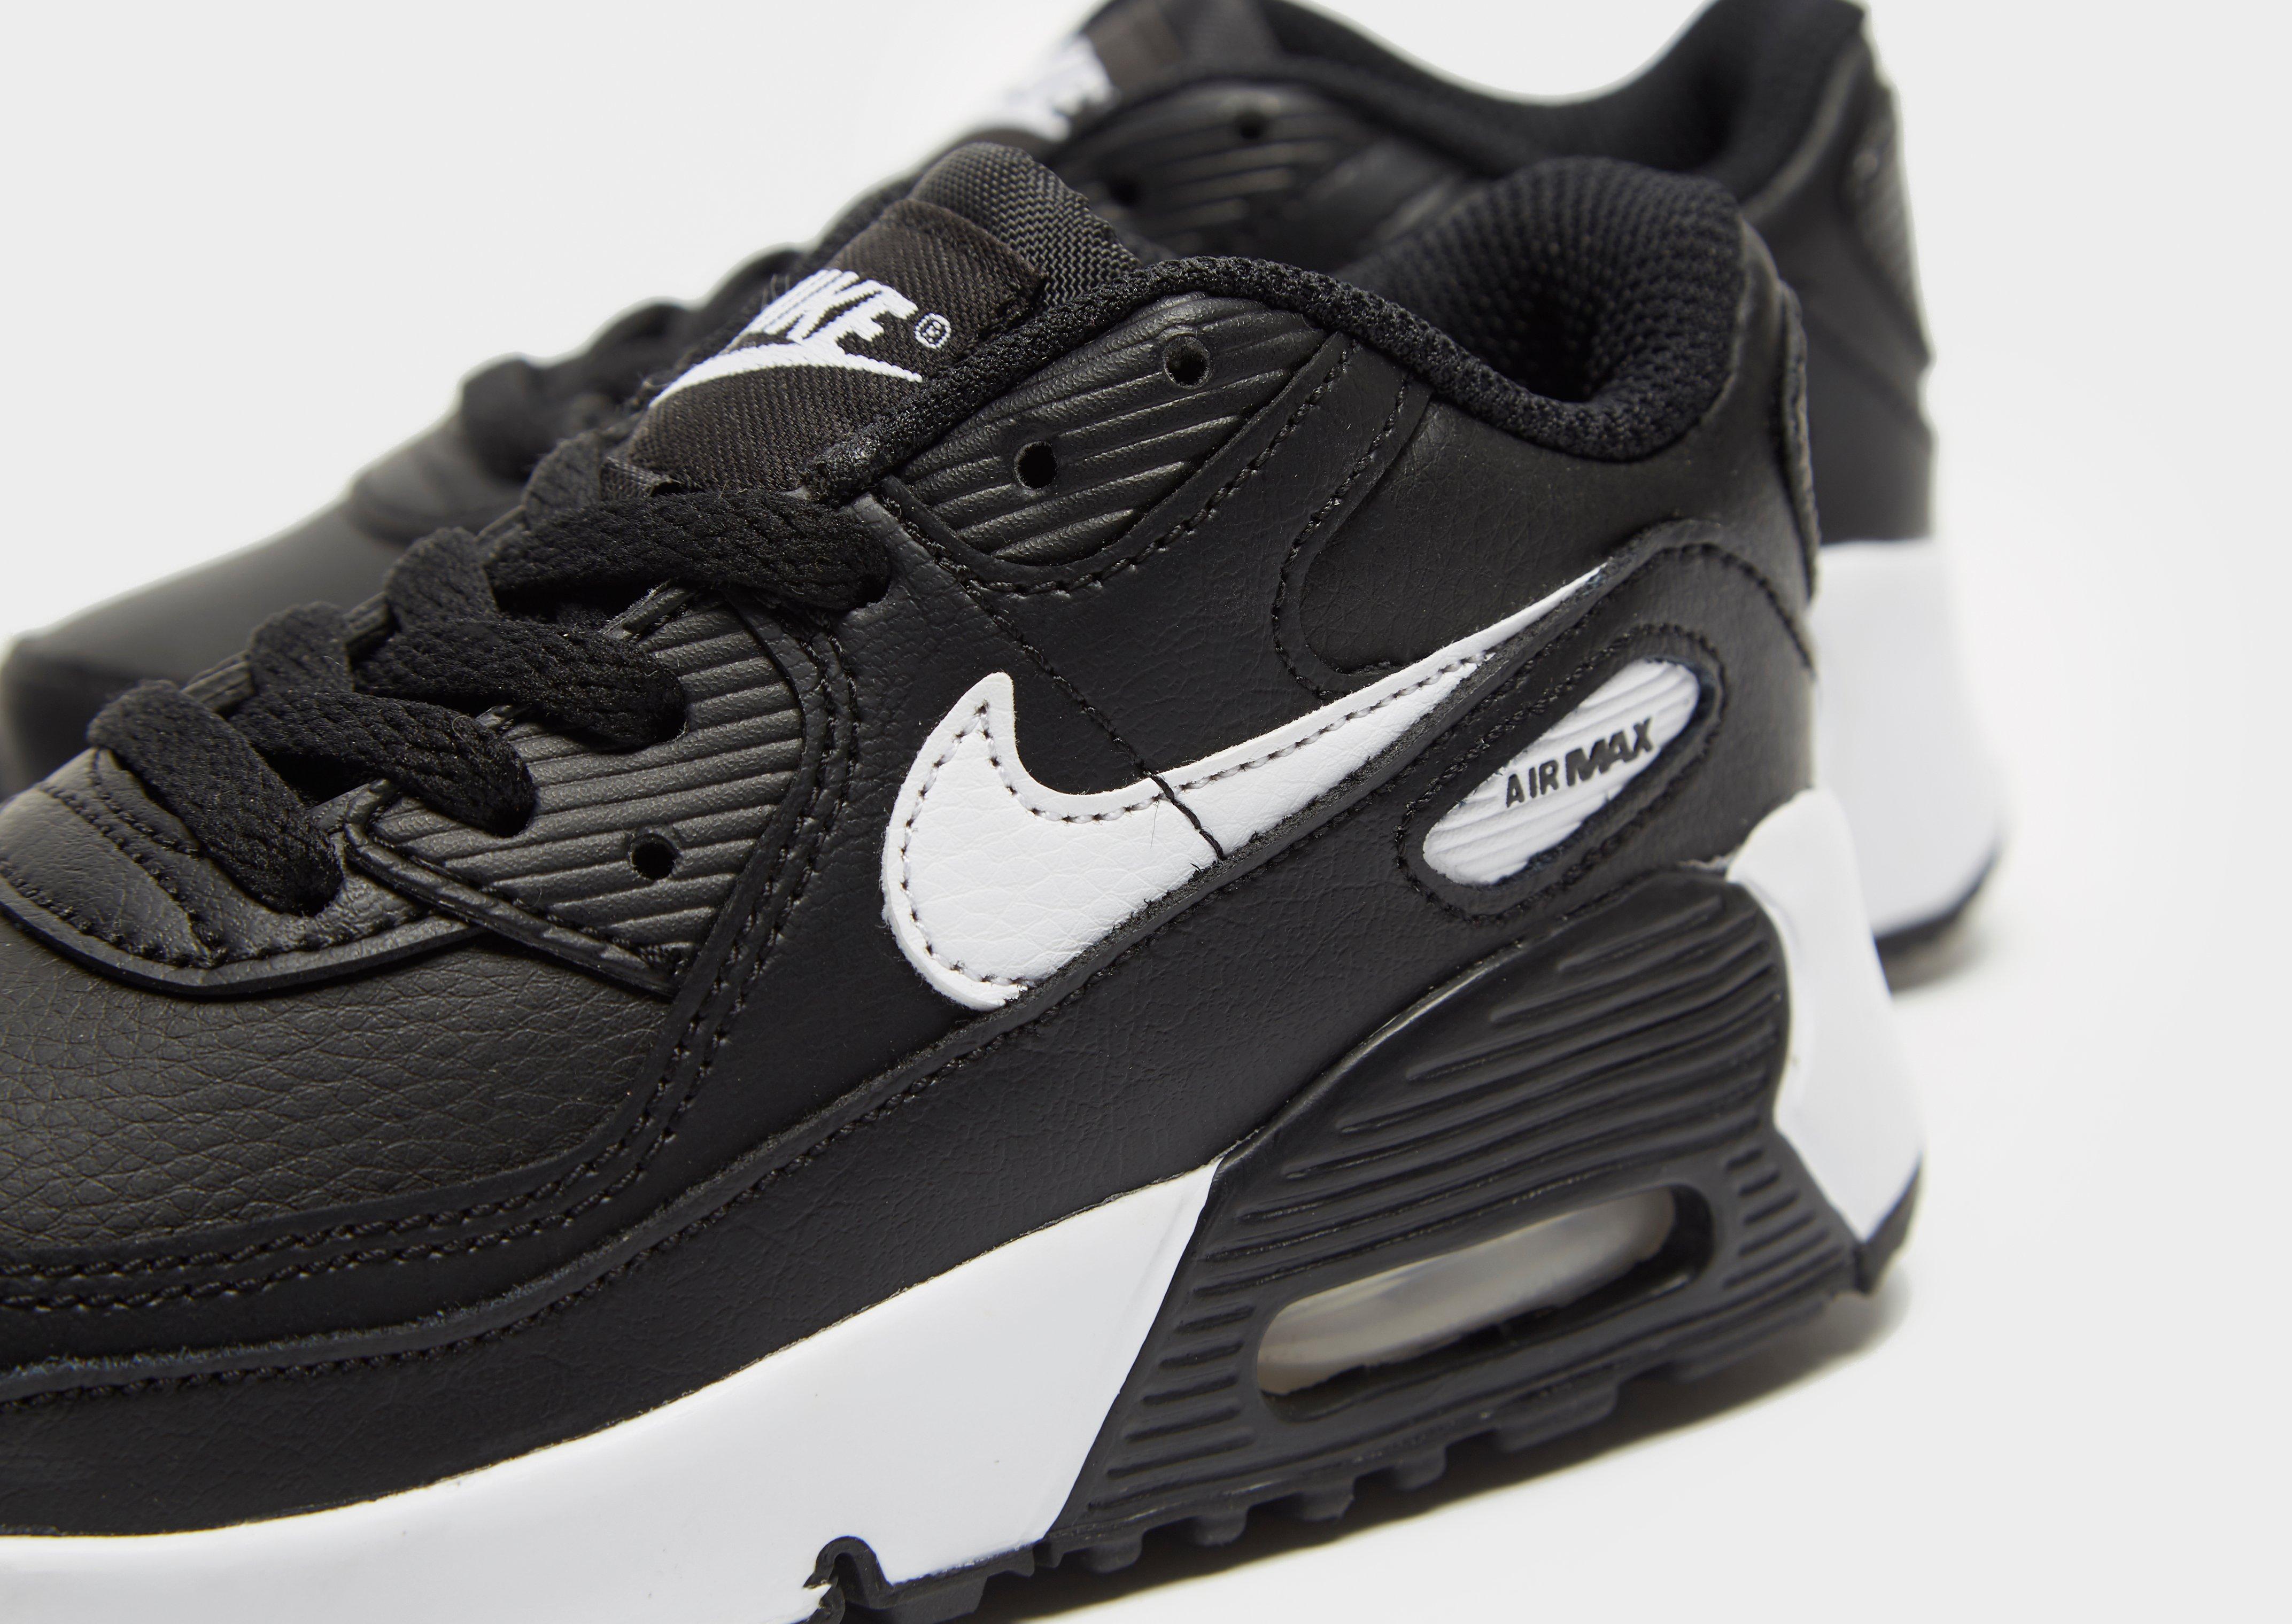 nike air max 90 leather infant